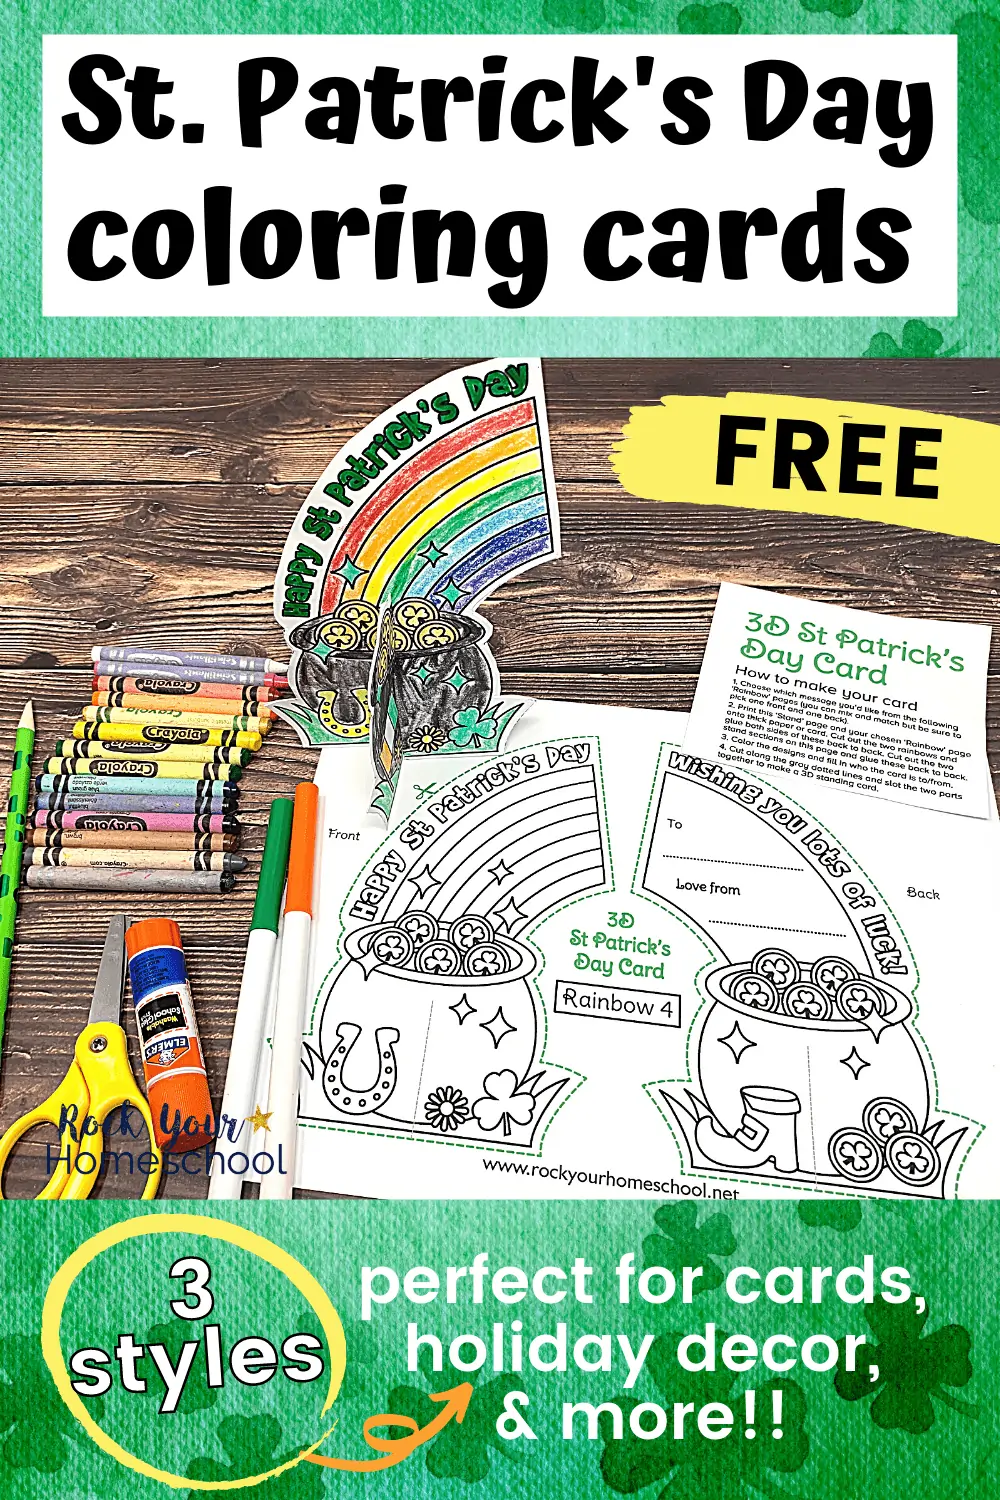 Free St Patrick’s Day Cards for Kids: 3D Coloring Fun and More